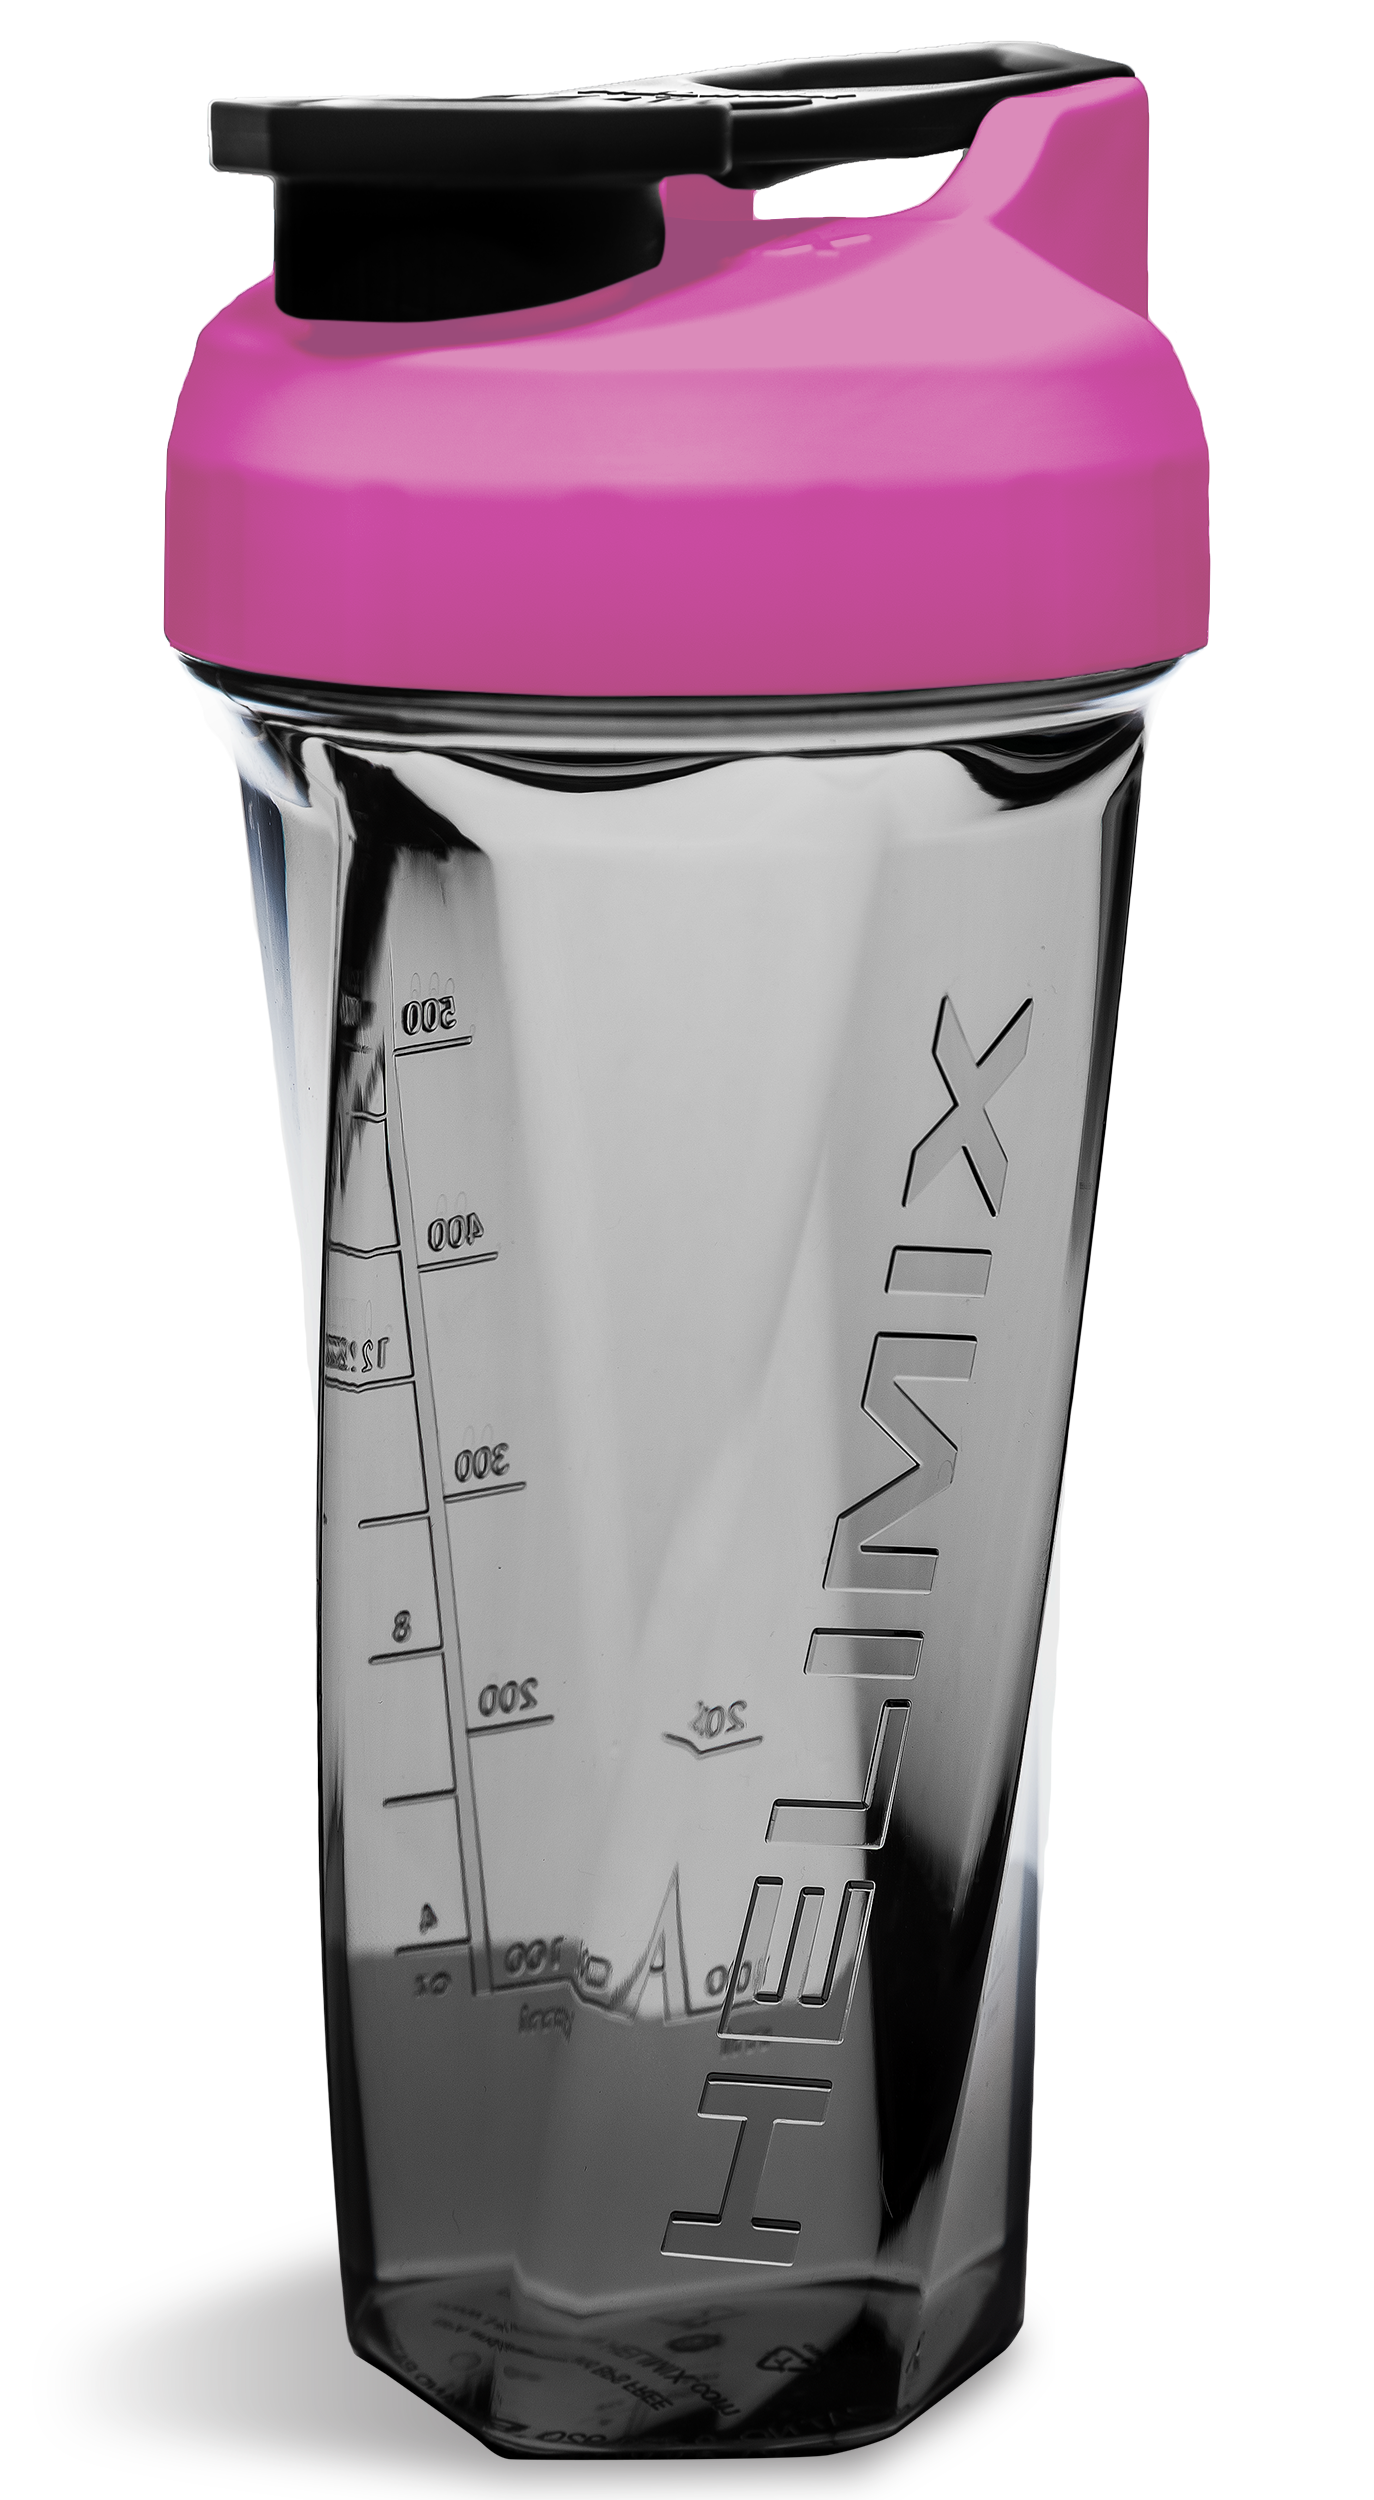 Personalised Pink 600ml Shaker Bottle Protein Sport Fitness With Shaker 